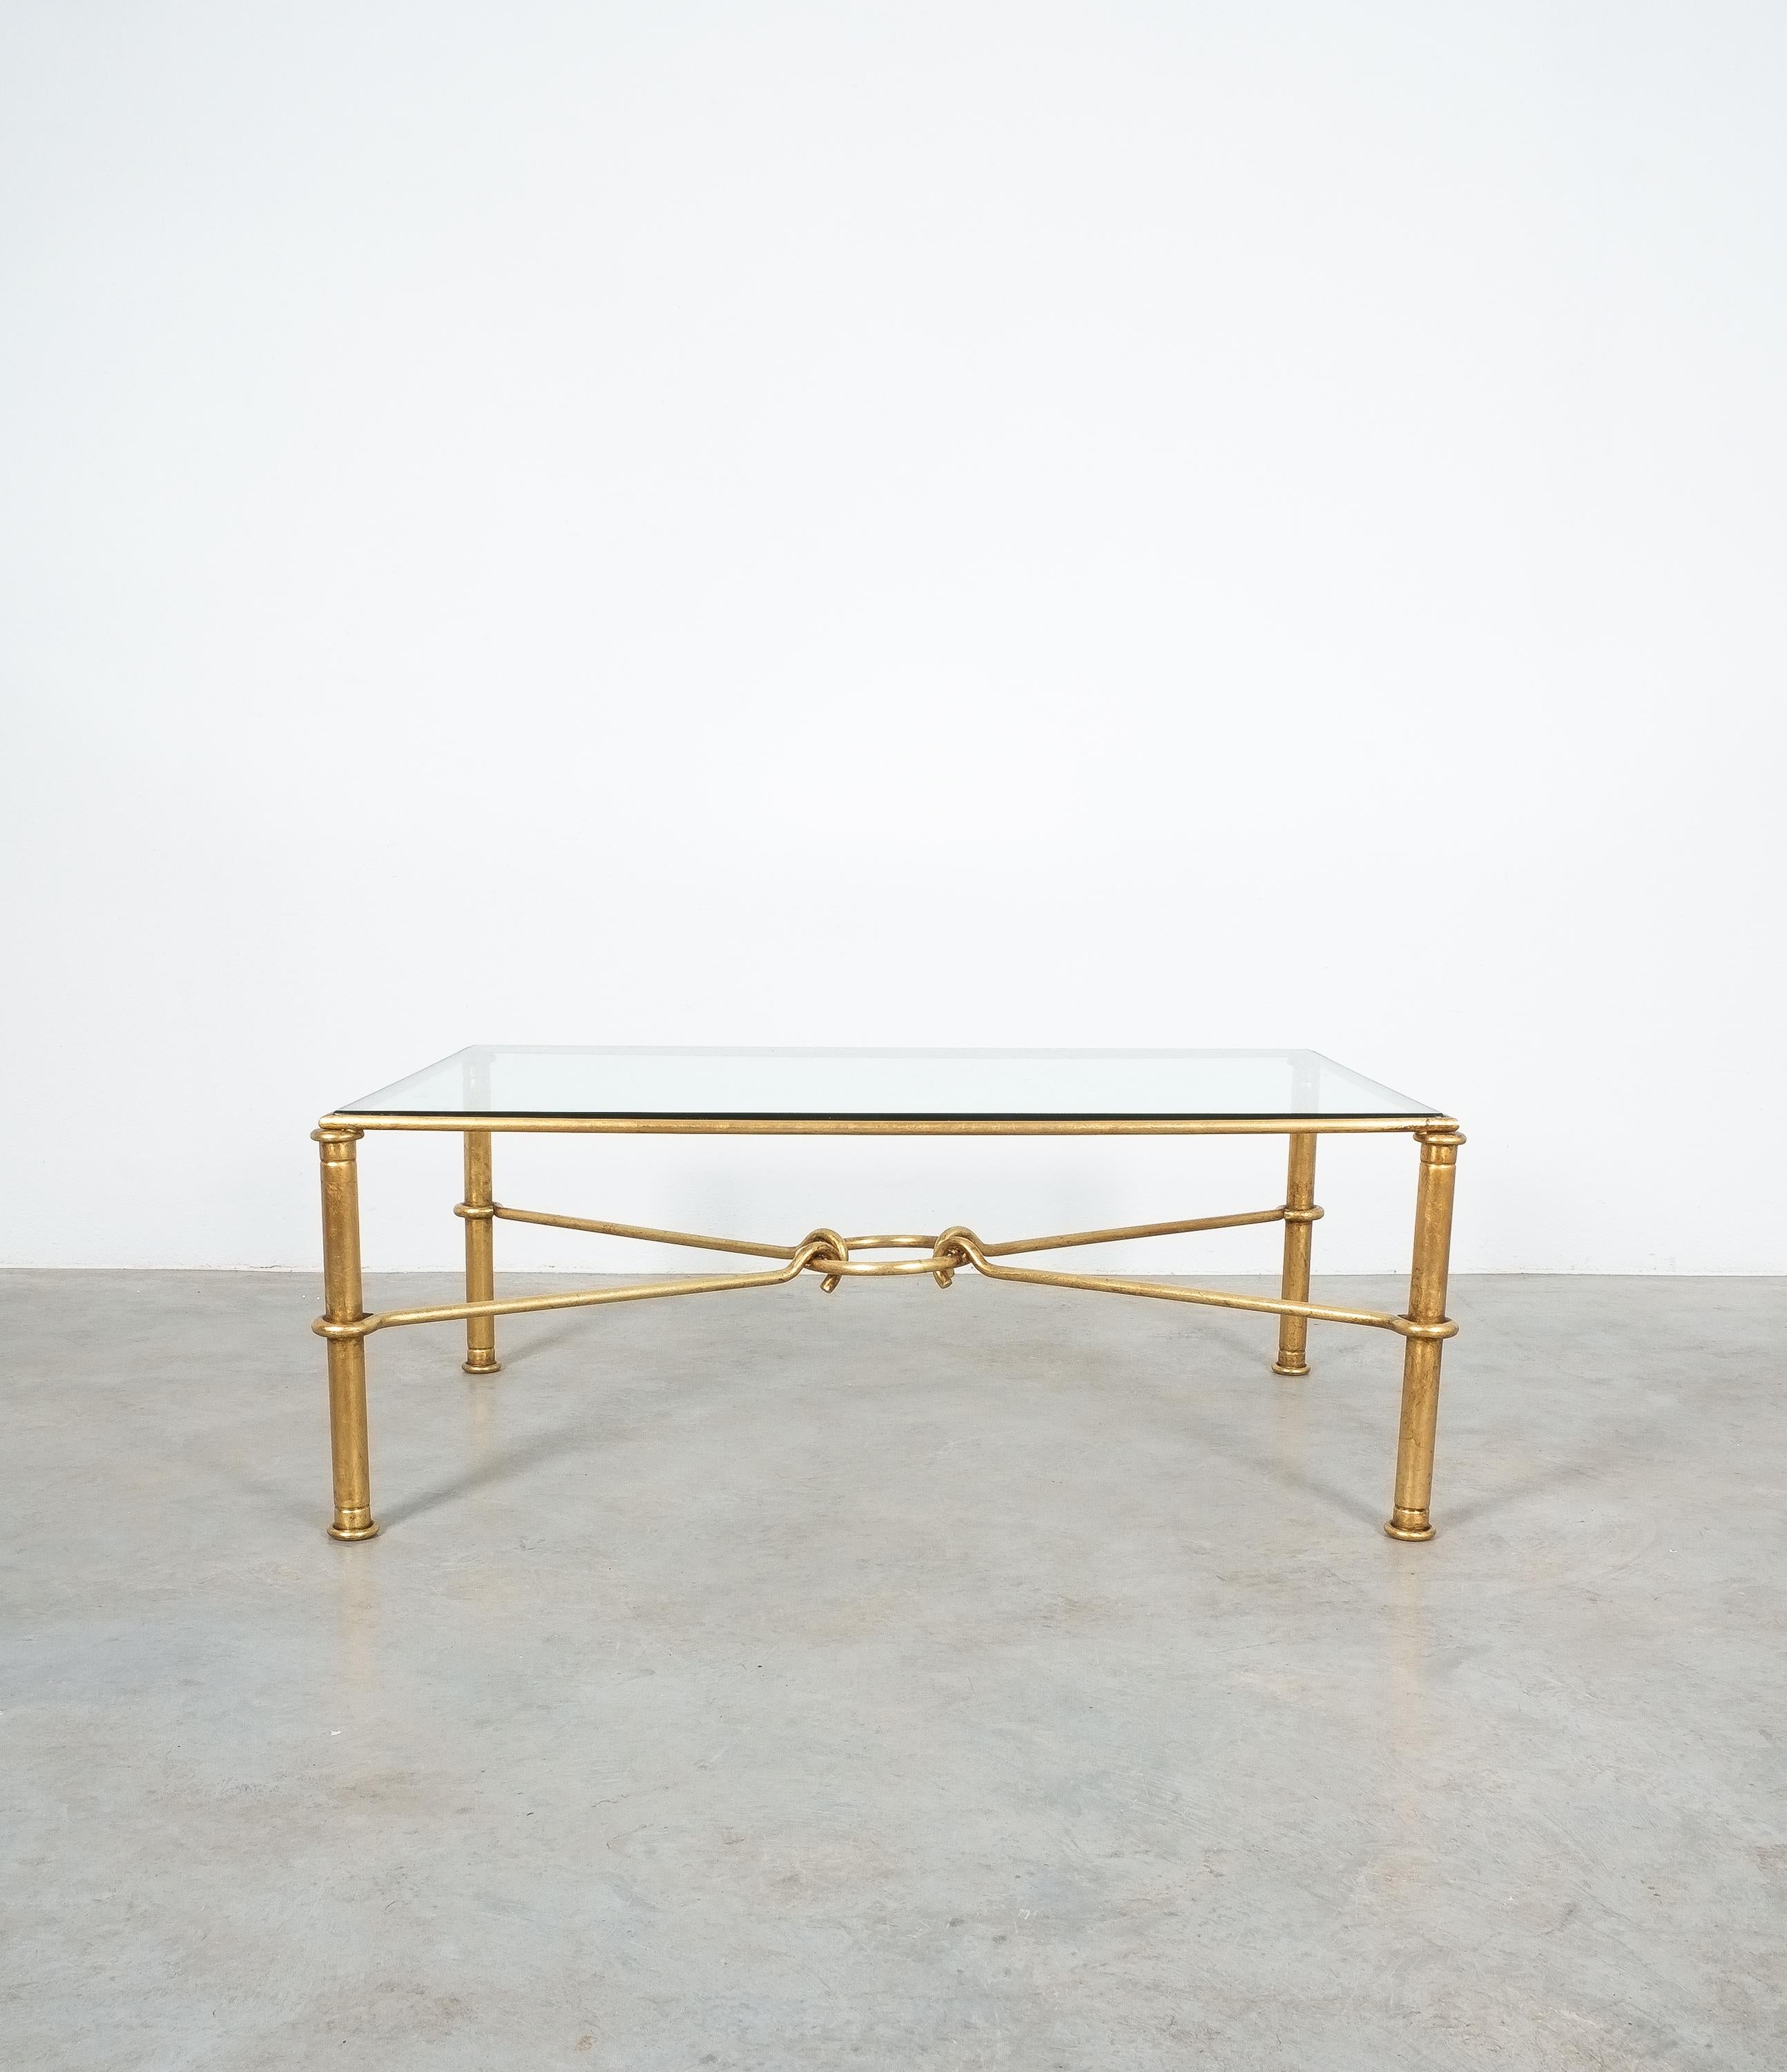 Very large gilt iron coffee table for Hermes by artist/designer Giovanni Banci, Italy, circa 1970

Large center coffee table neoclassical Hermes styling utilizing rings and hooks to simulate a horse bit. The thick high quality glass with smoothened